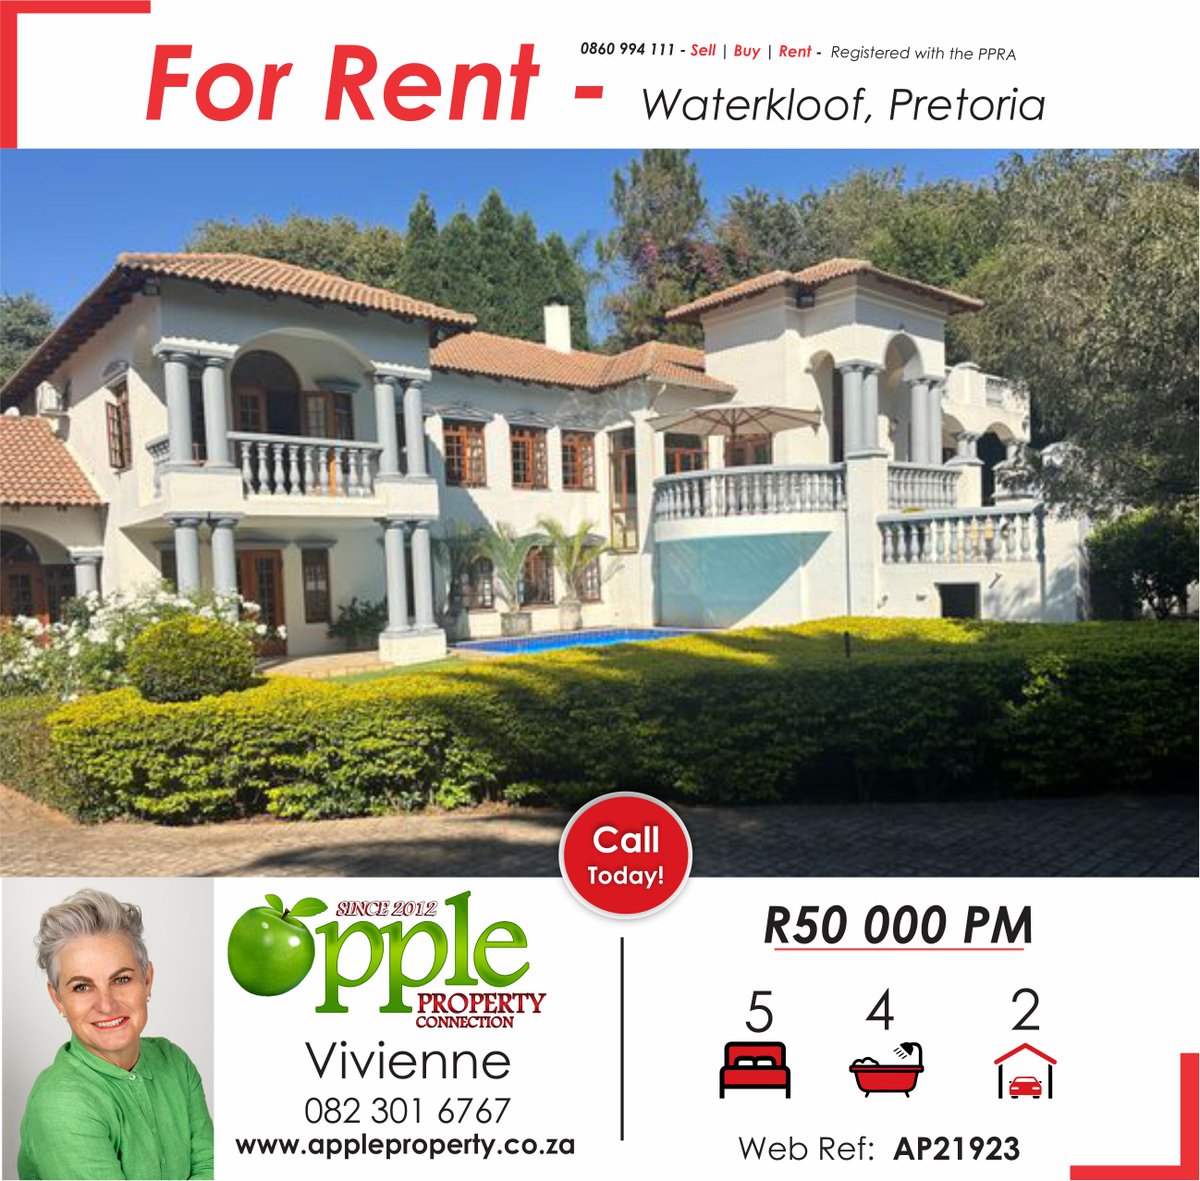 🔥 Hot, fresh new listings now LIVE on our website!
🏡 Don't miss out on your dream home - browse our latest properties today!
appleproperty.co.za

#househunting #newlistings #realestate #DreamHome #ApplePropertyConnection